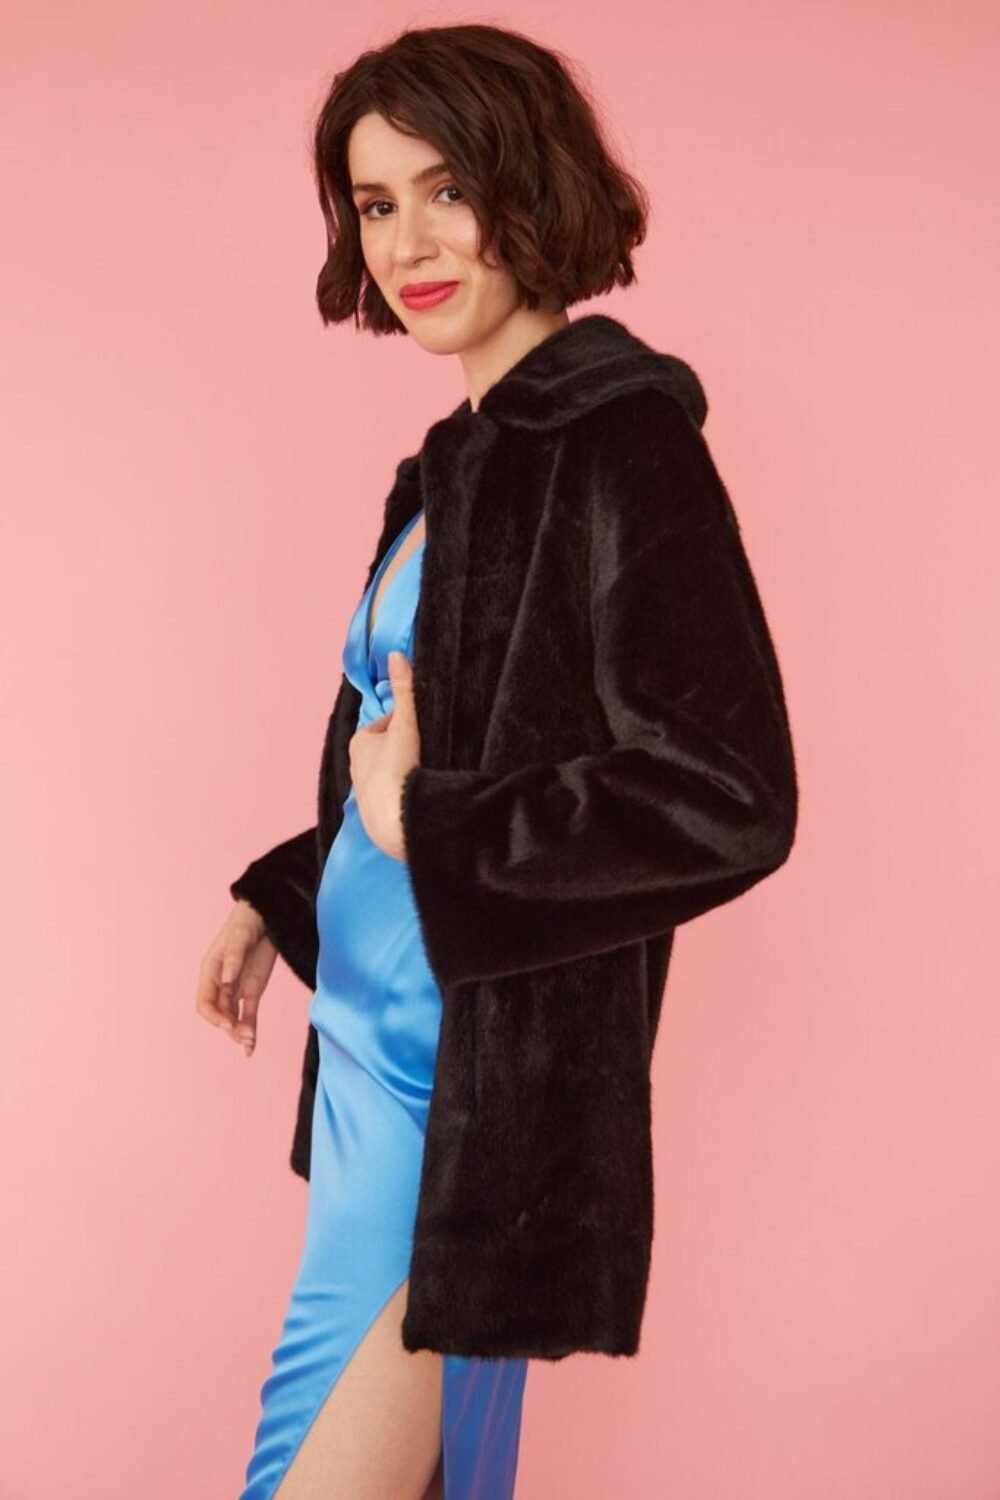 Shop Lux Black Faux Fur Duchess Midi Coat and women's luxury and designer clothes at www.lux-apparel.co.uk